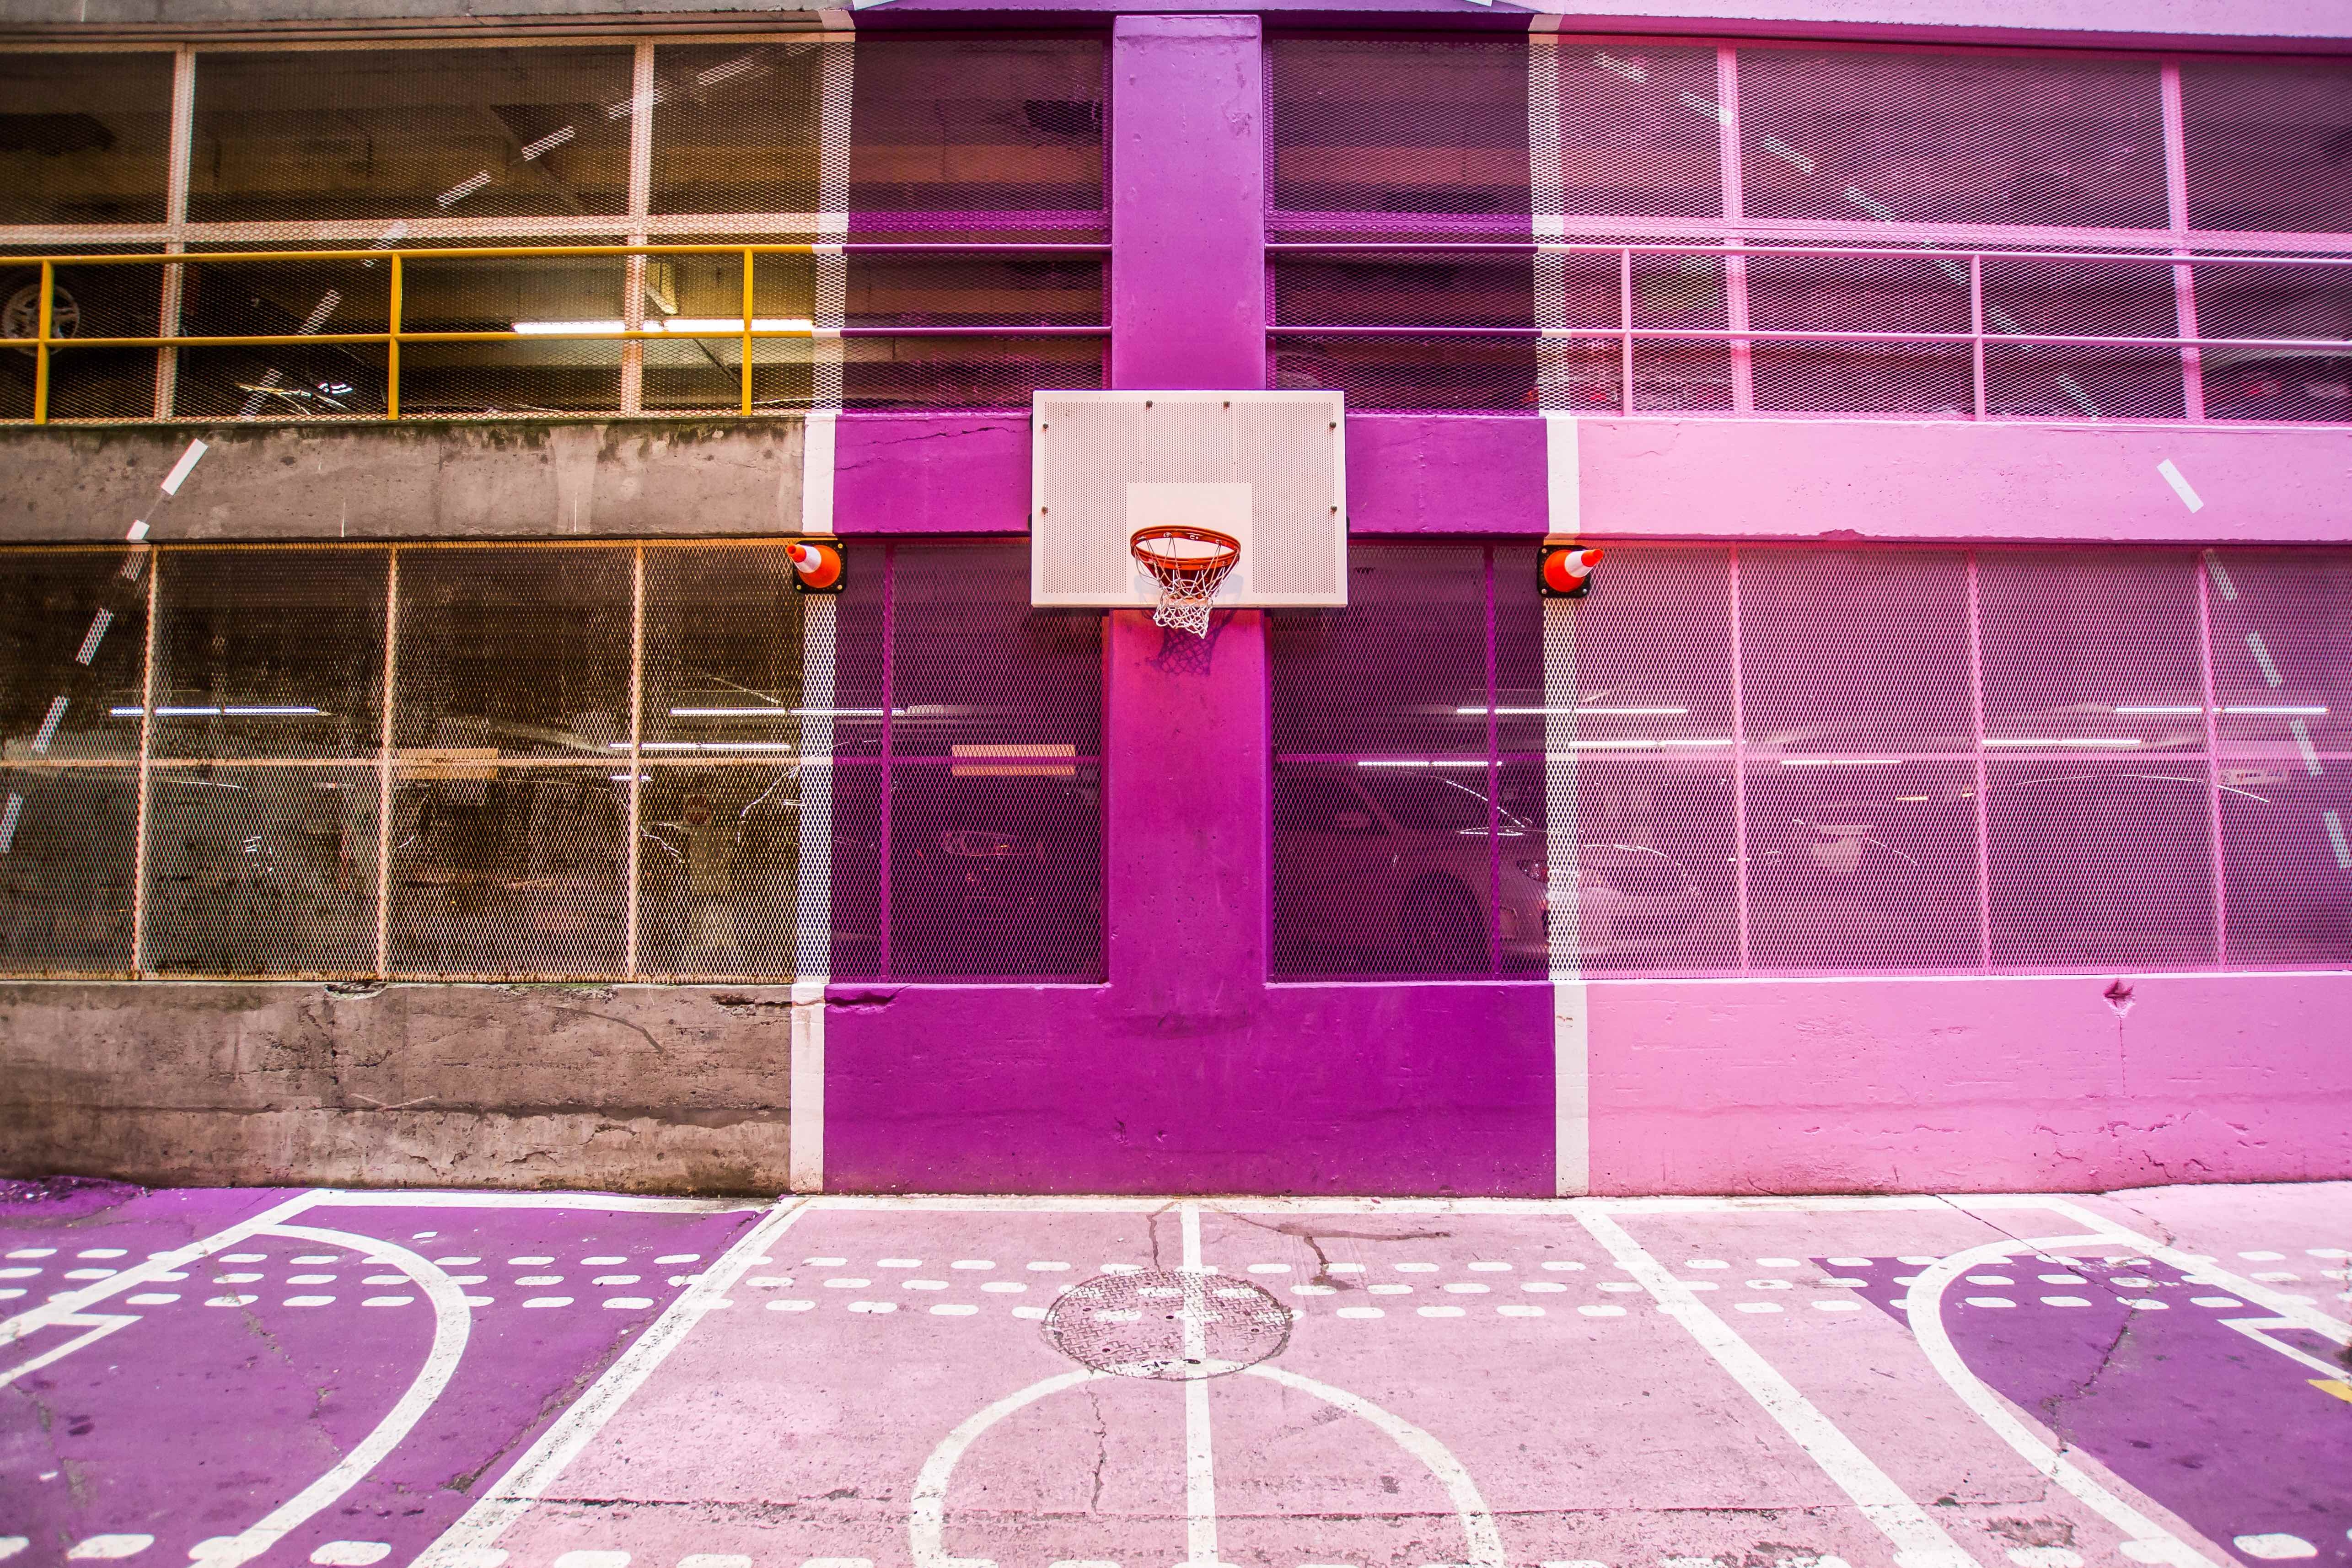 white and brown basketball board mounted in purple concrete high rise building